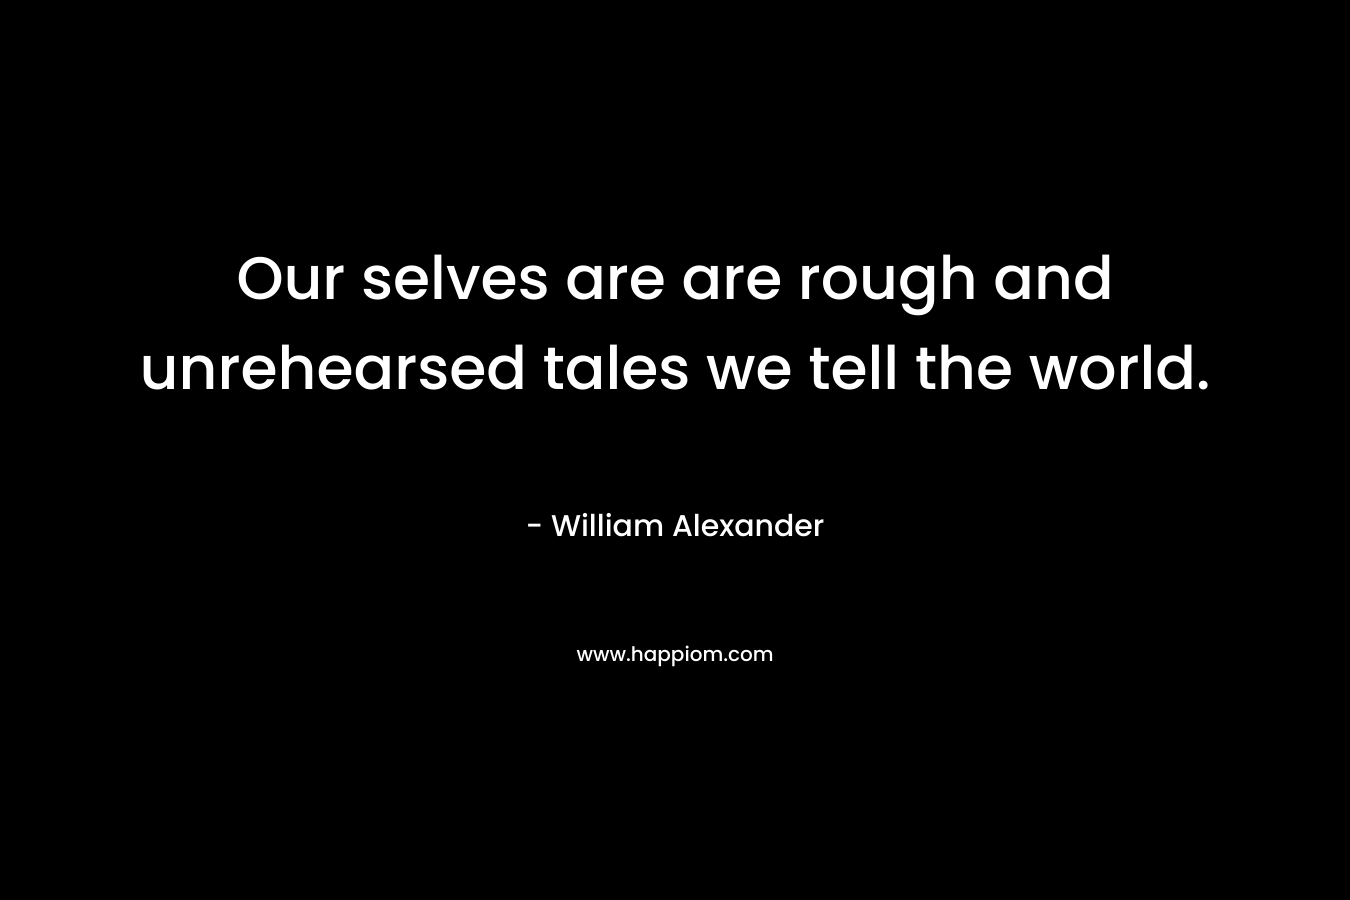 Our selves are are rough and unrehearsed tales we tell the world. – William Alexander